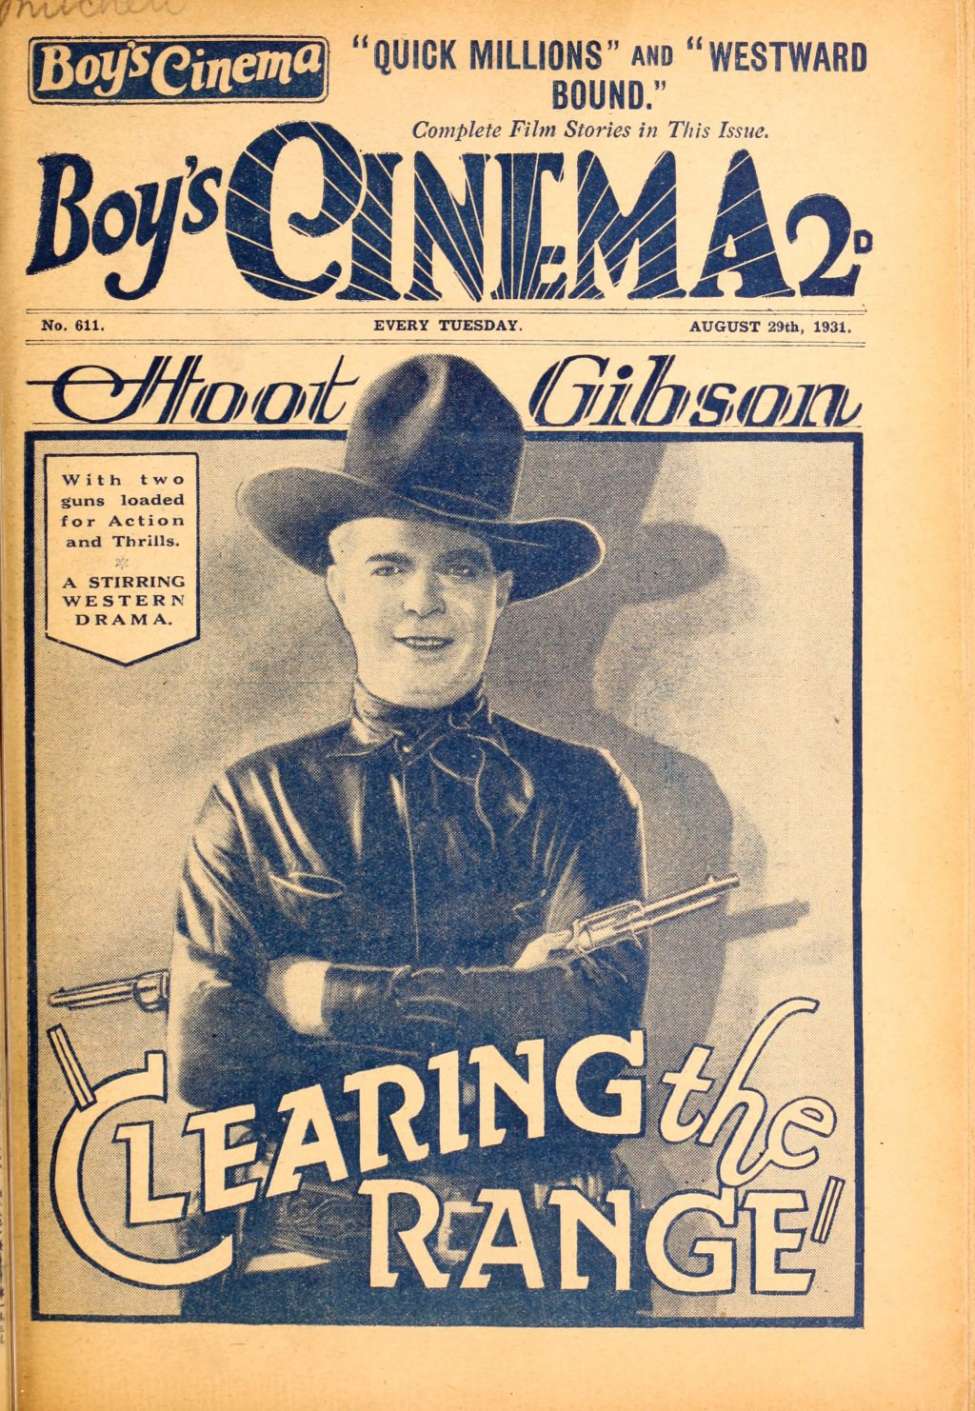 Comic Book Cover For Boy's Cinema 611 - Clearing the Range - Hoot Gibson